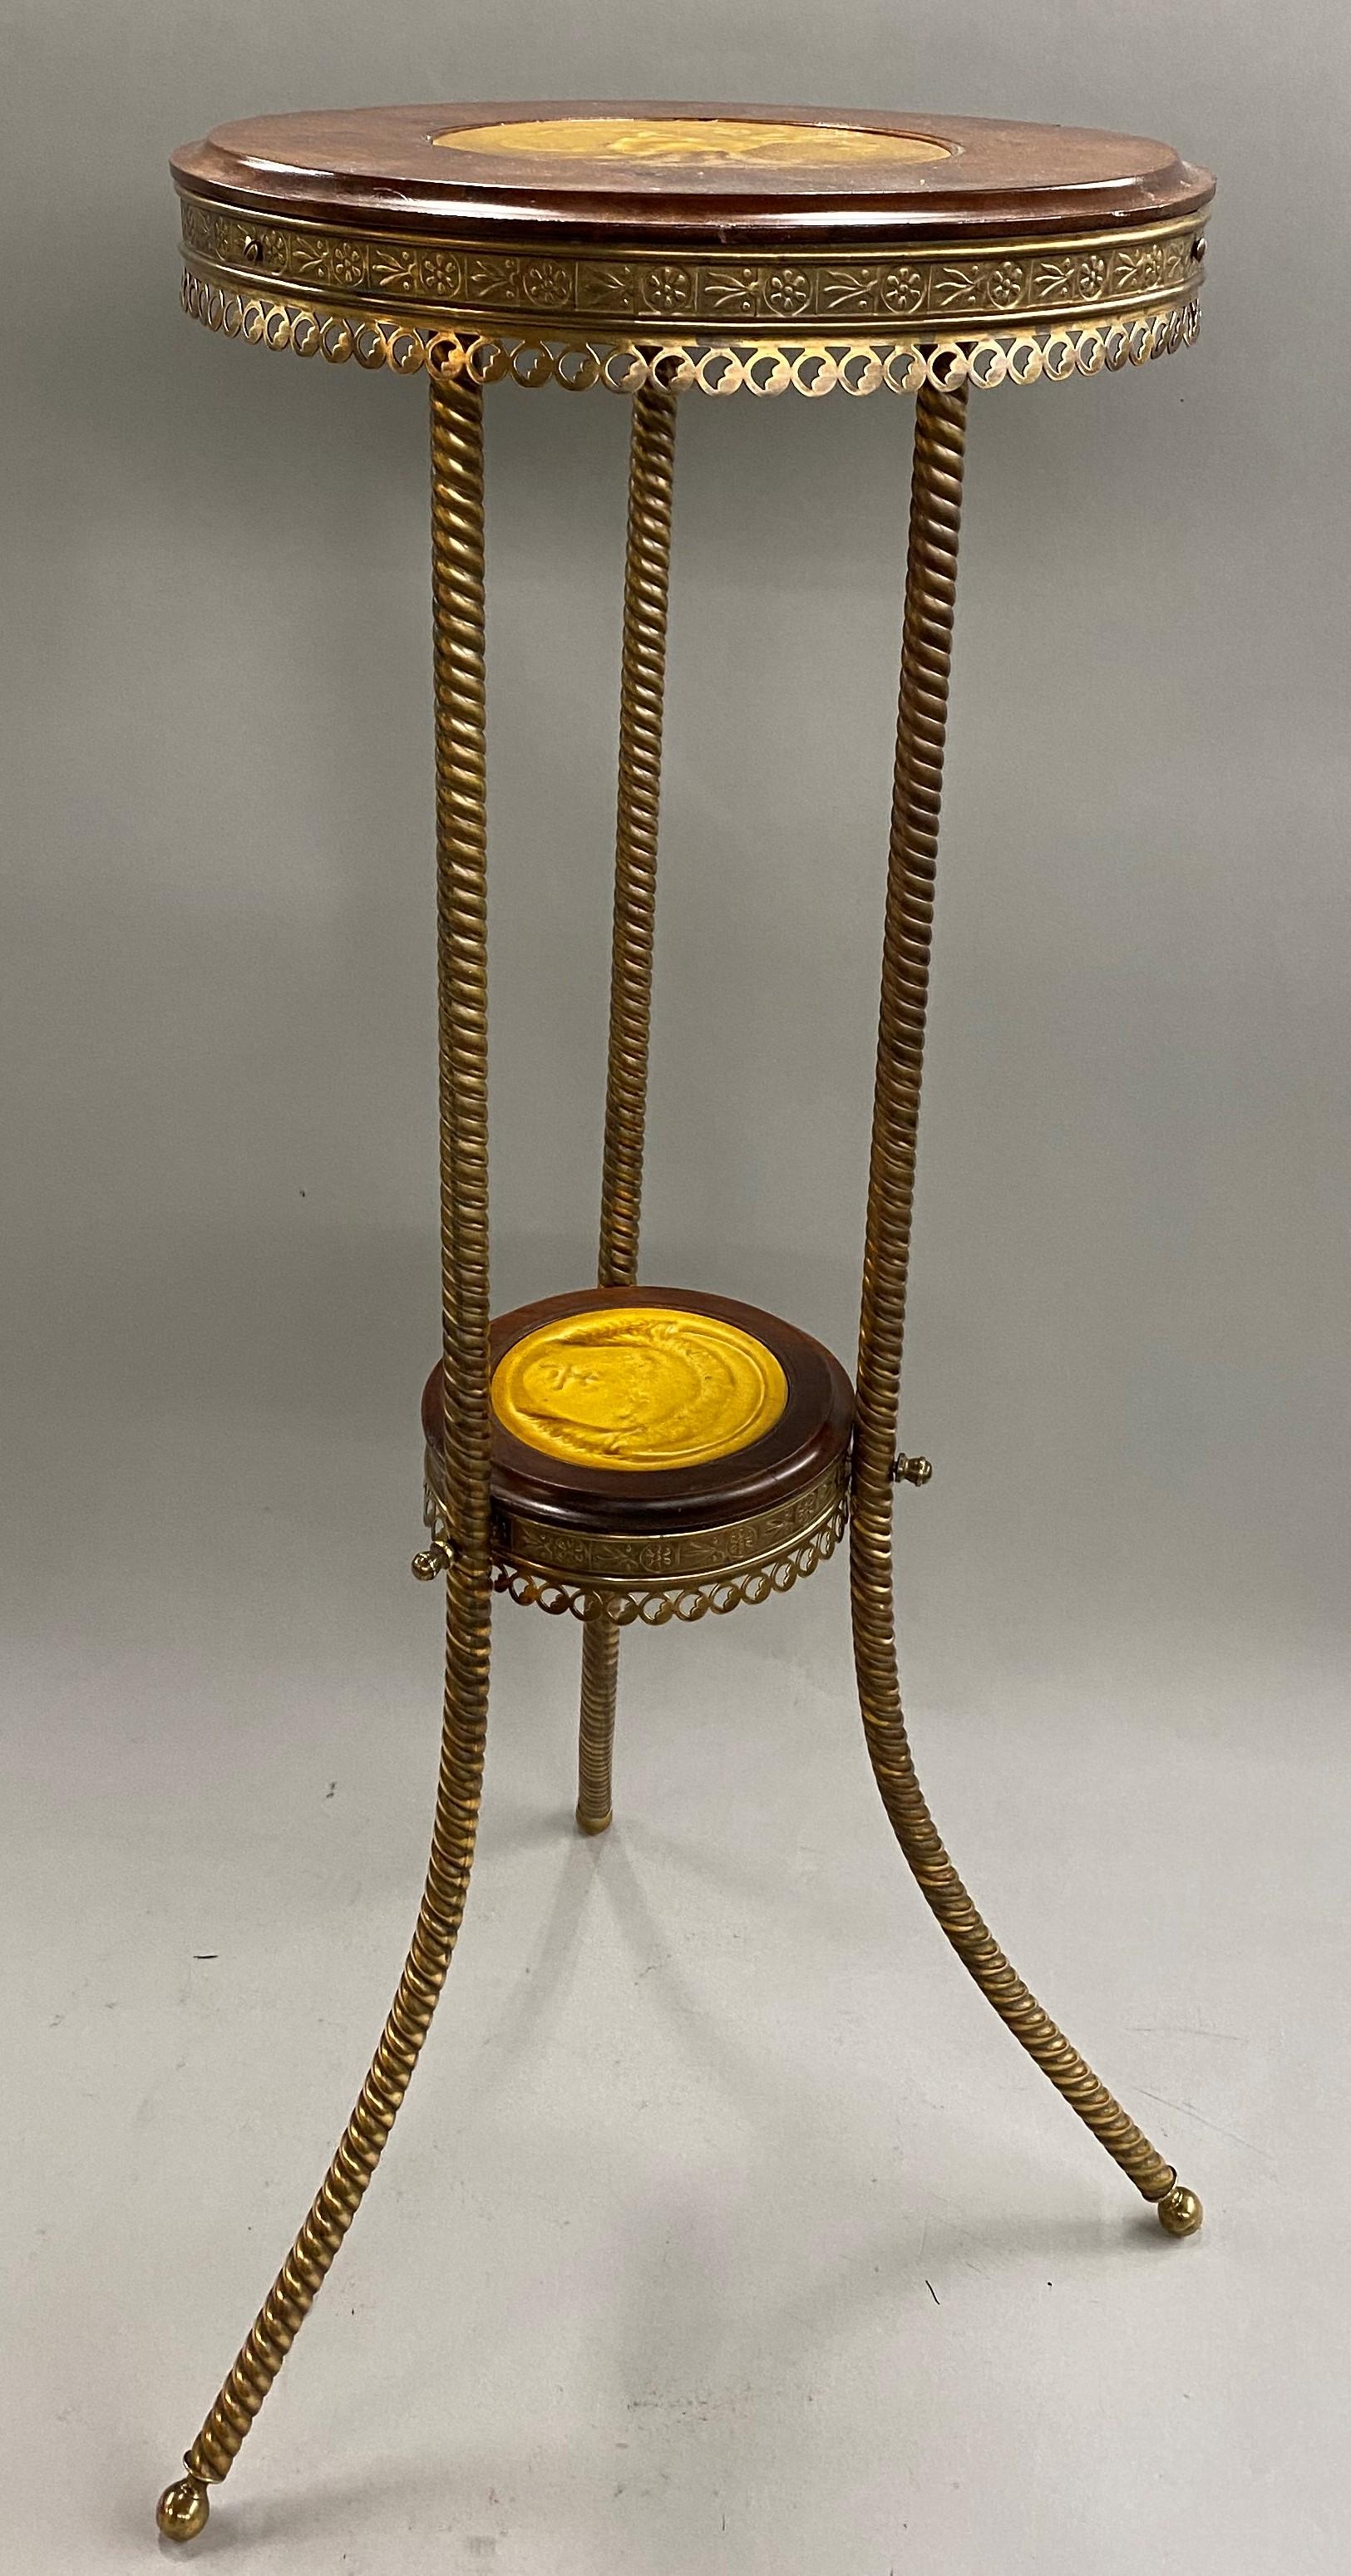 19th Century J. & J.G. Low Chelsea Tile Wooden and Brass Pedestal or Tripod Stand, circa 1884